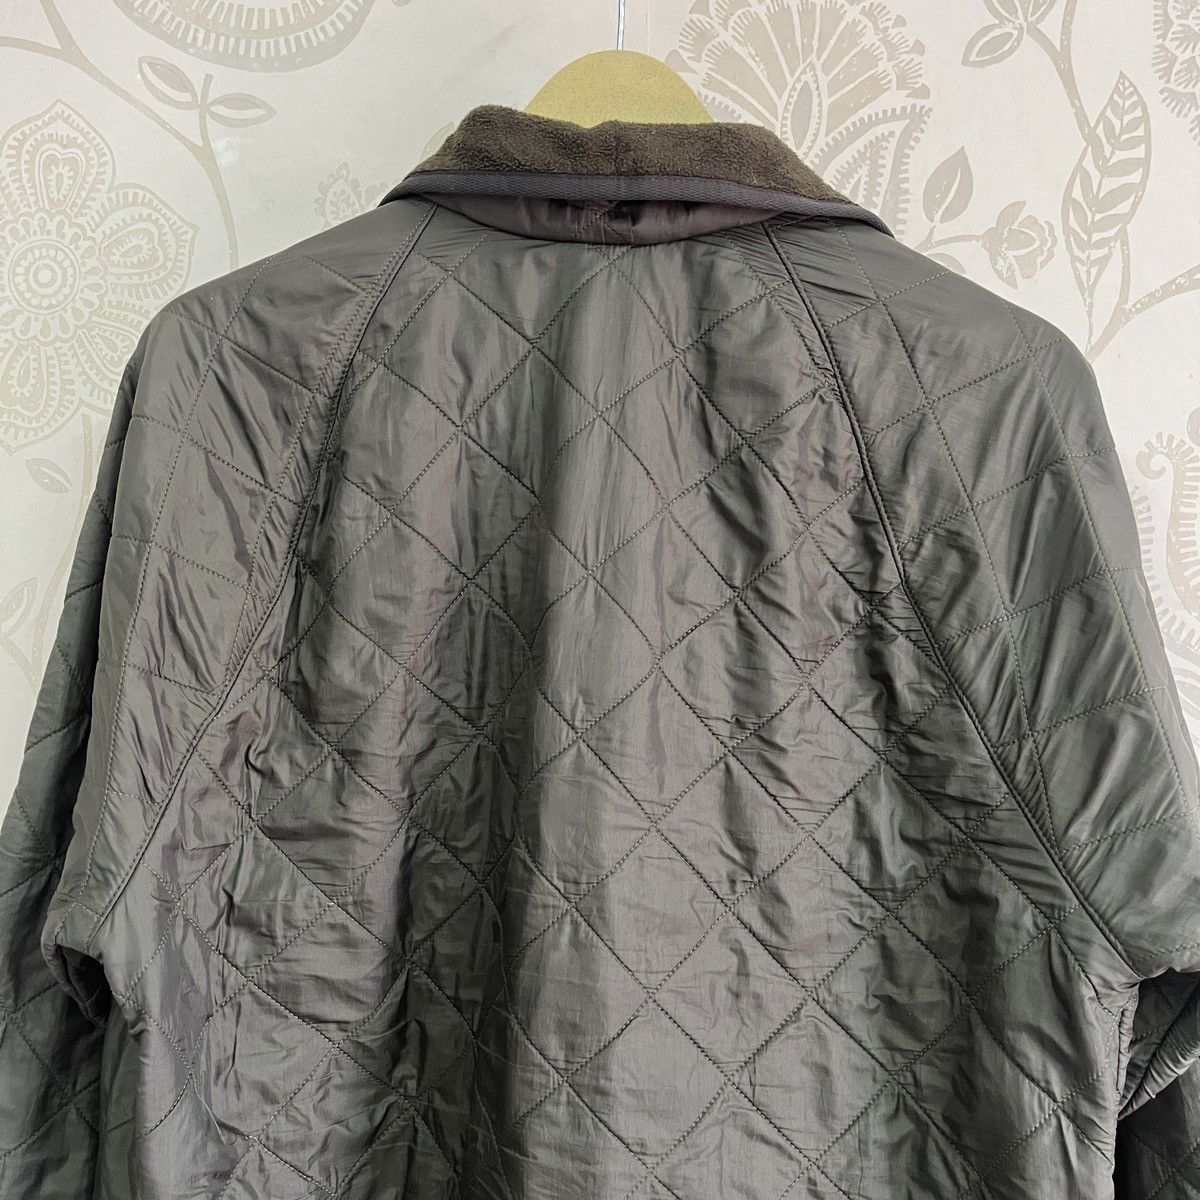 Vintage Barbour Noah Light Jacket Made In Romania - 25